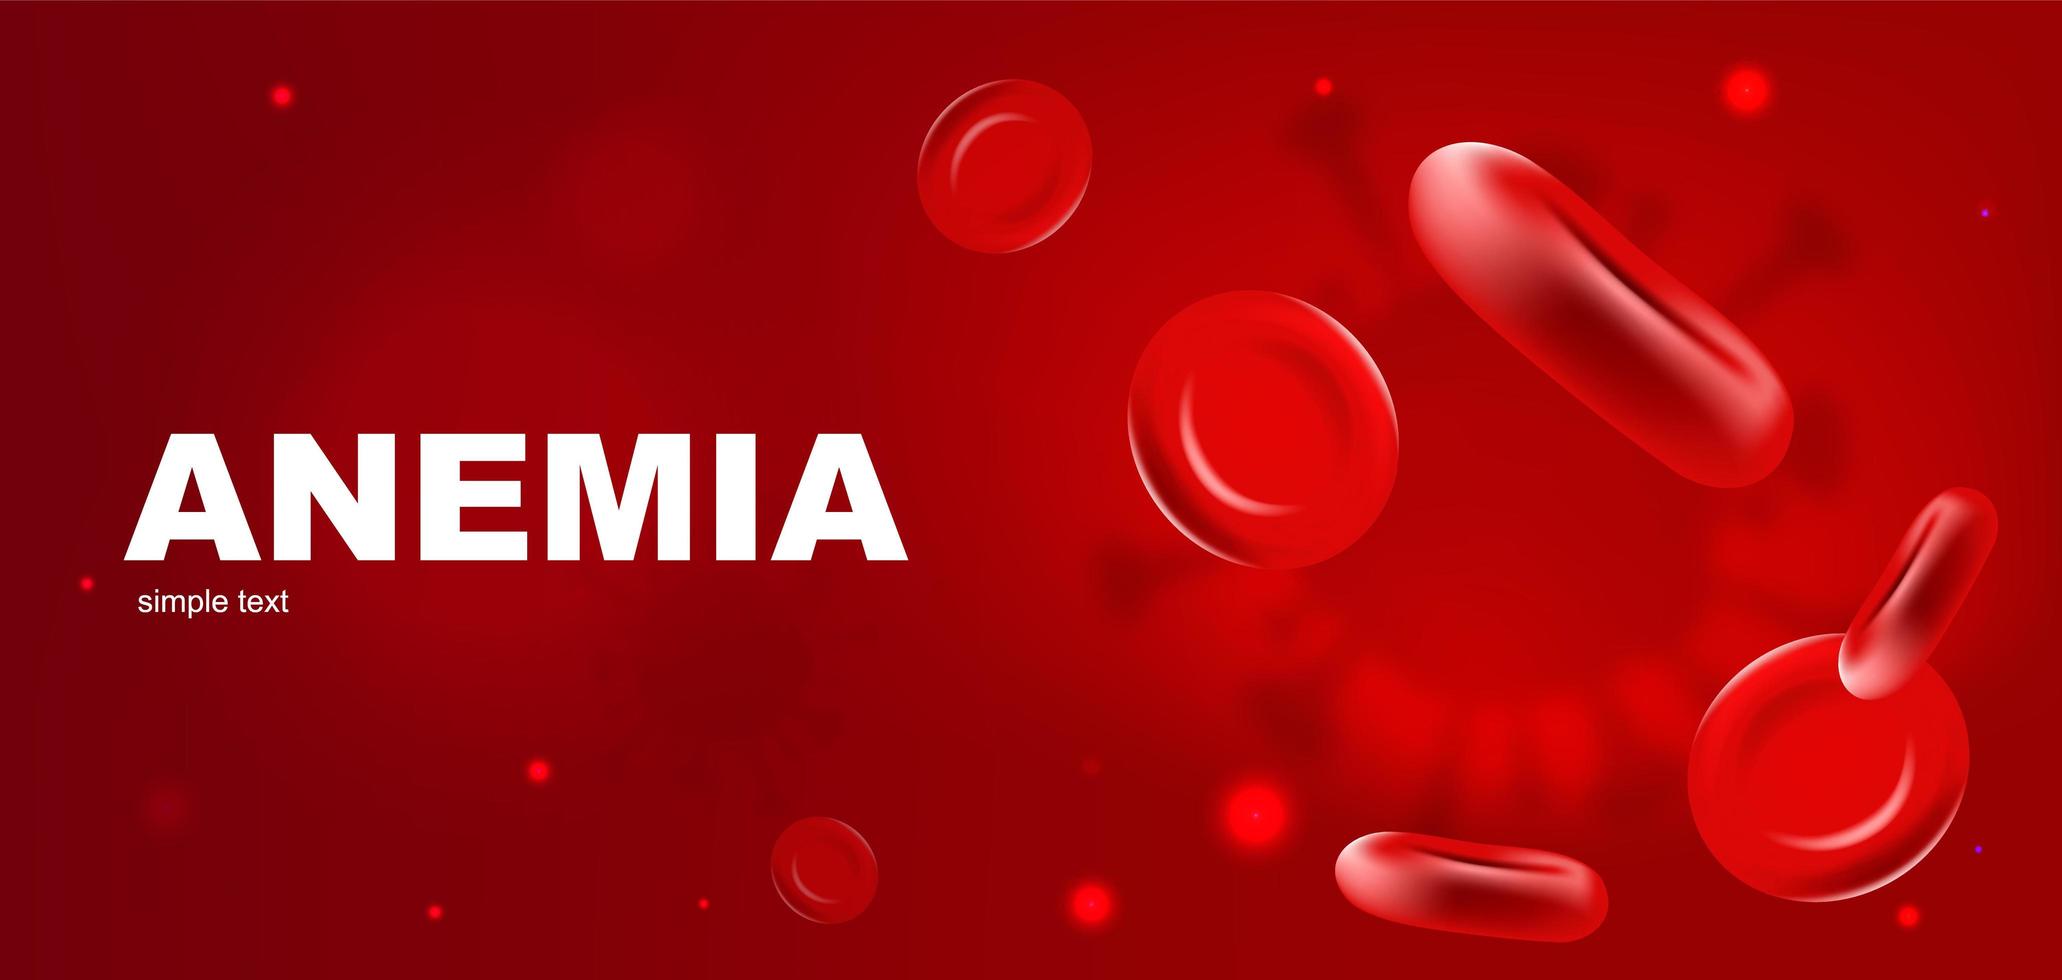 Anemia realistic vector banner template